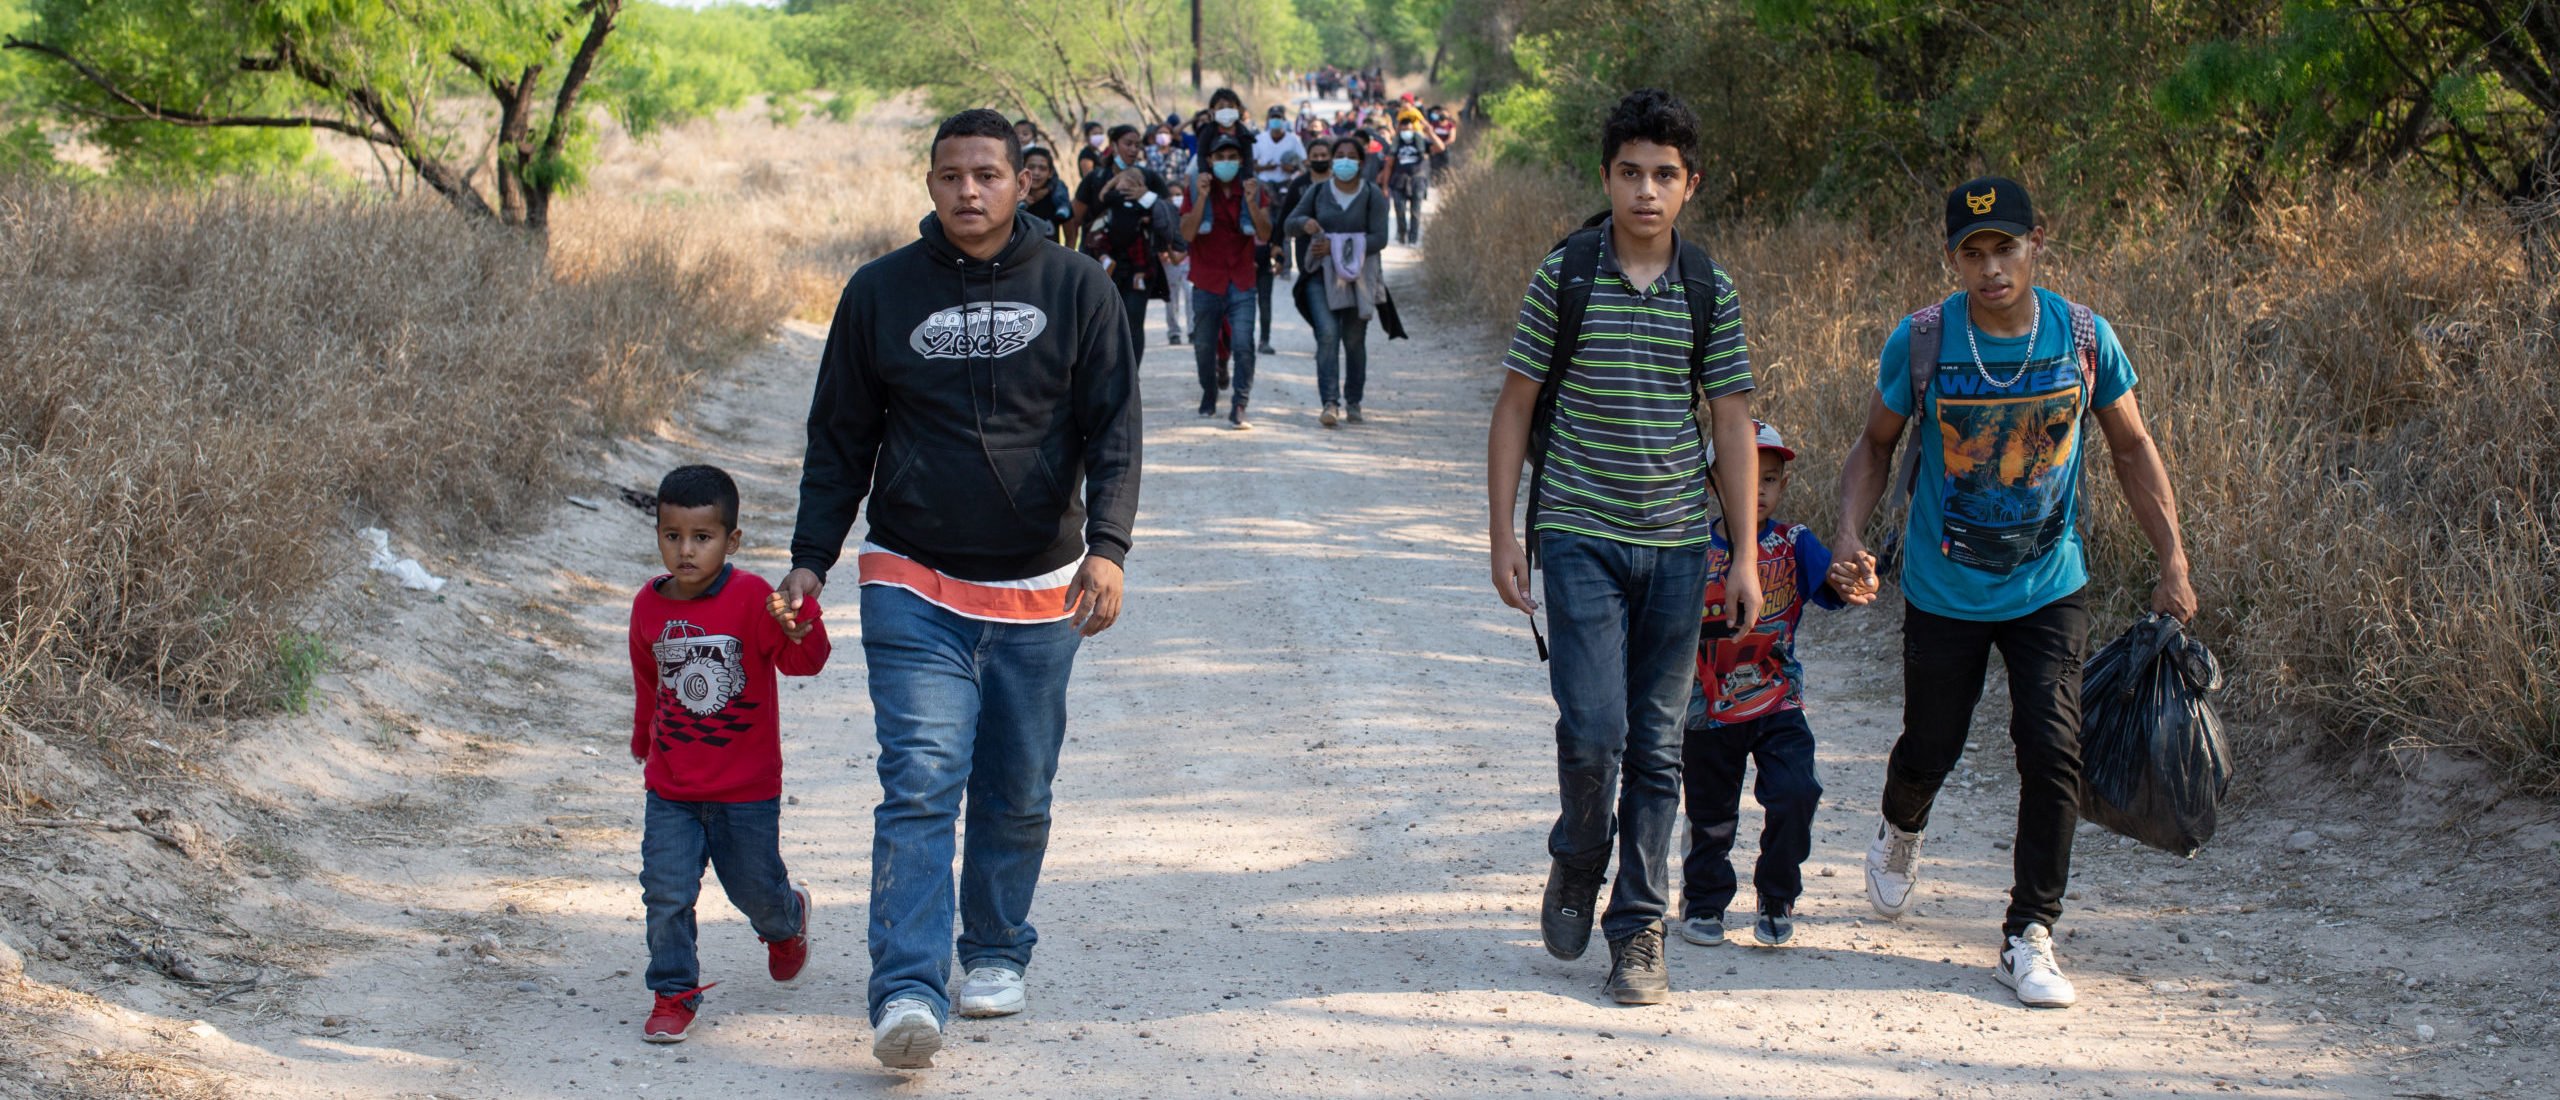 Illegal migrants use a road on private land to access a Customs and Border Protection field processing facility under the Anzalduas International Bridge near Mission, Texas, on March 26, 2021. (Kaylee Greenlee - Daily Caller News Foundation)